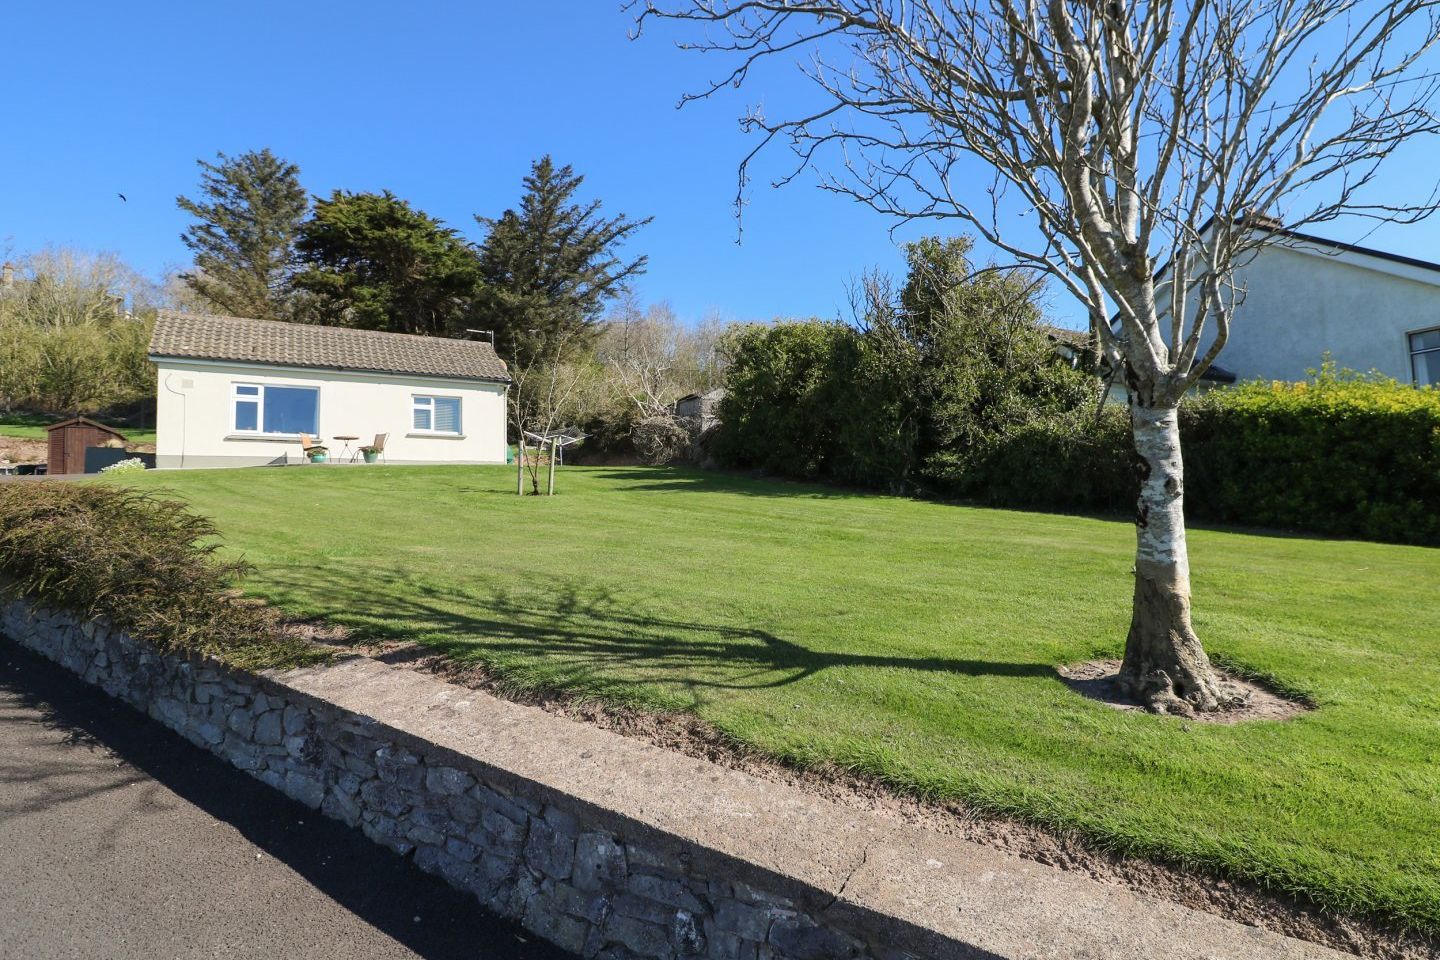 Summerfield Lodge Cottage, Summerfield Lodge, Youghal, Co. Cork